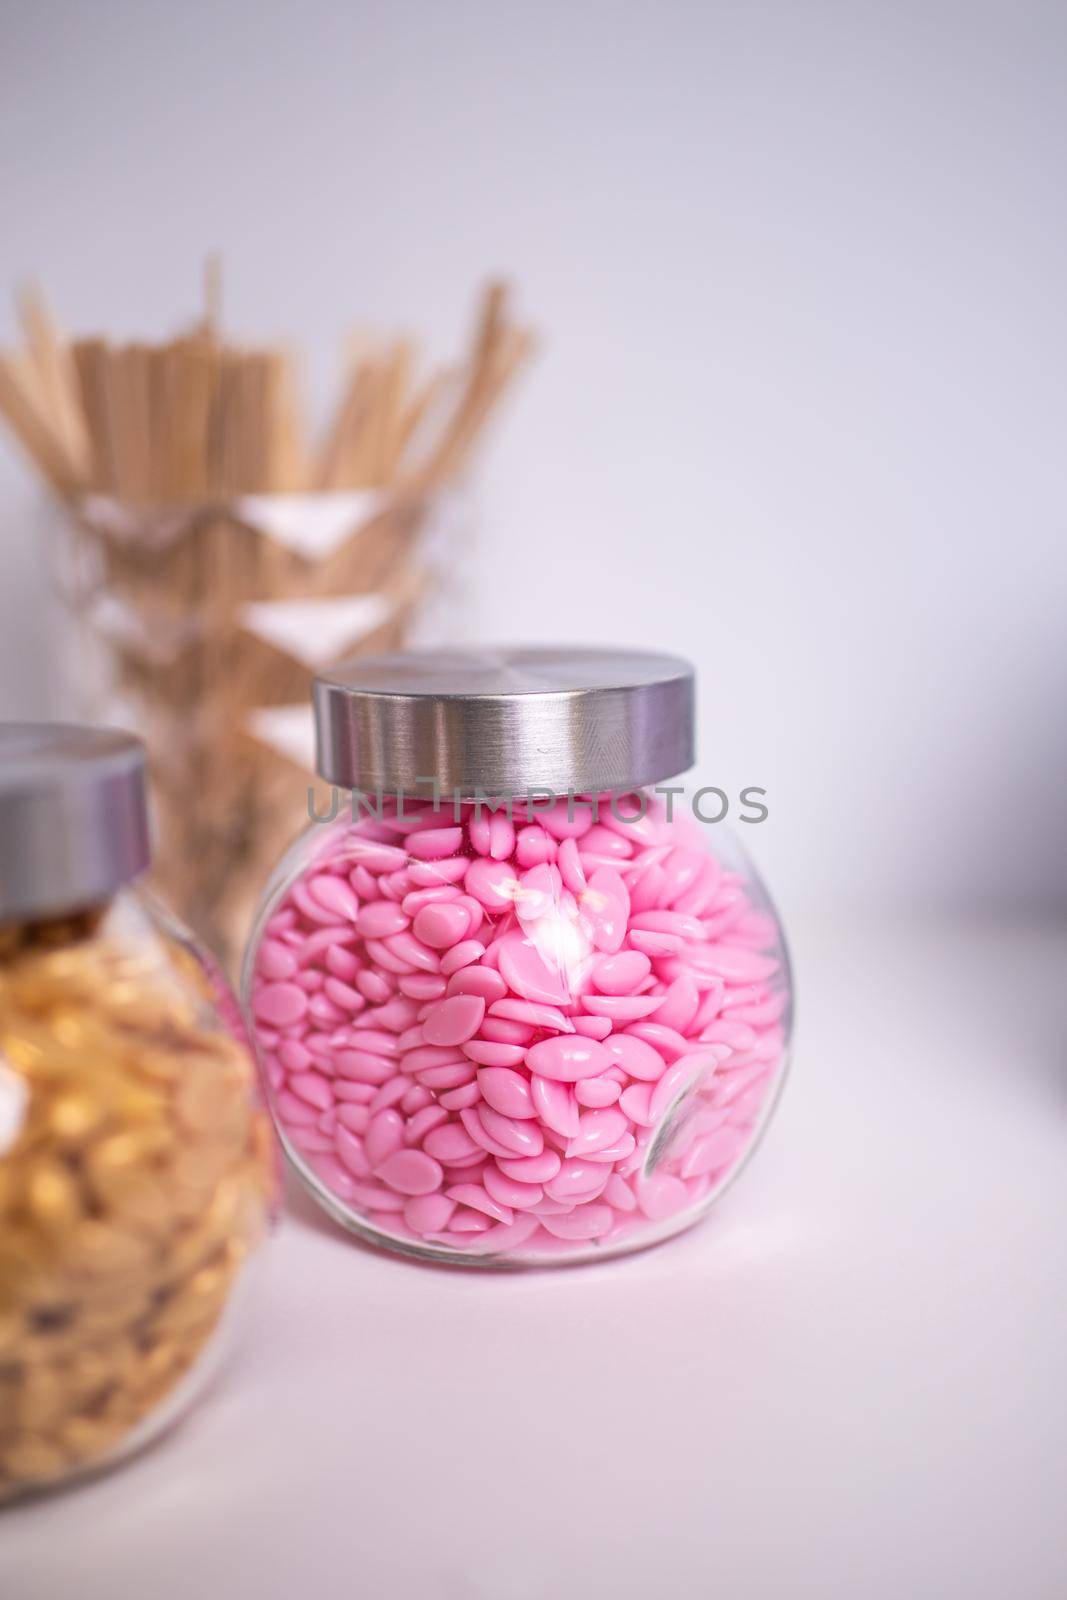 Glass jars filled with wax granules for depilation with wooden blades on the back blurred background by bySergPo